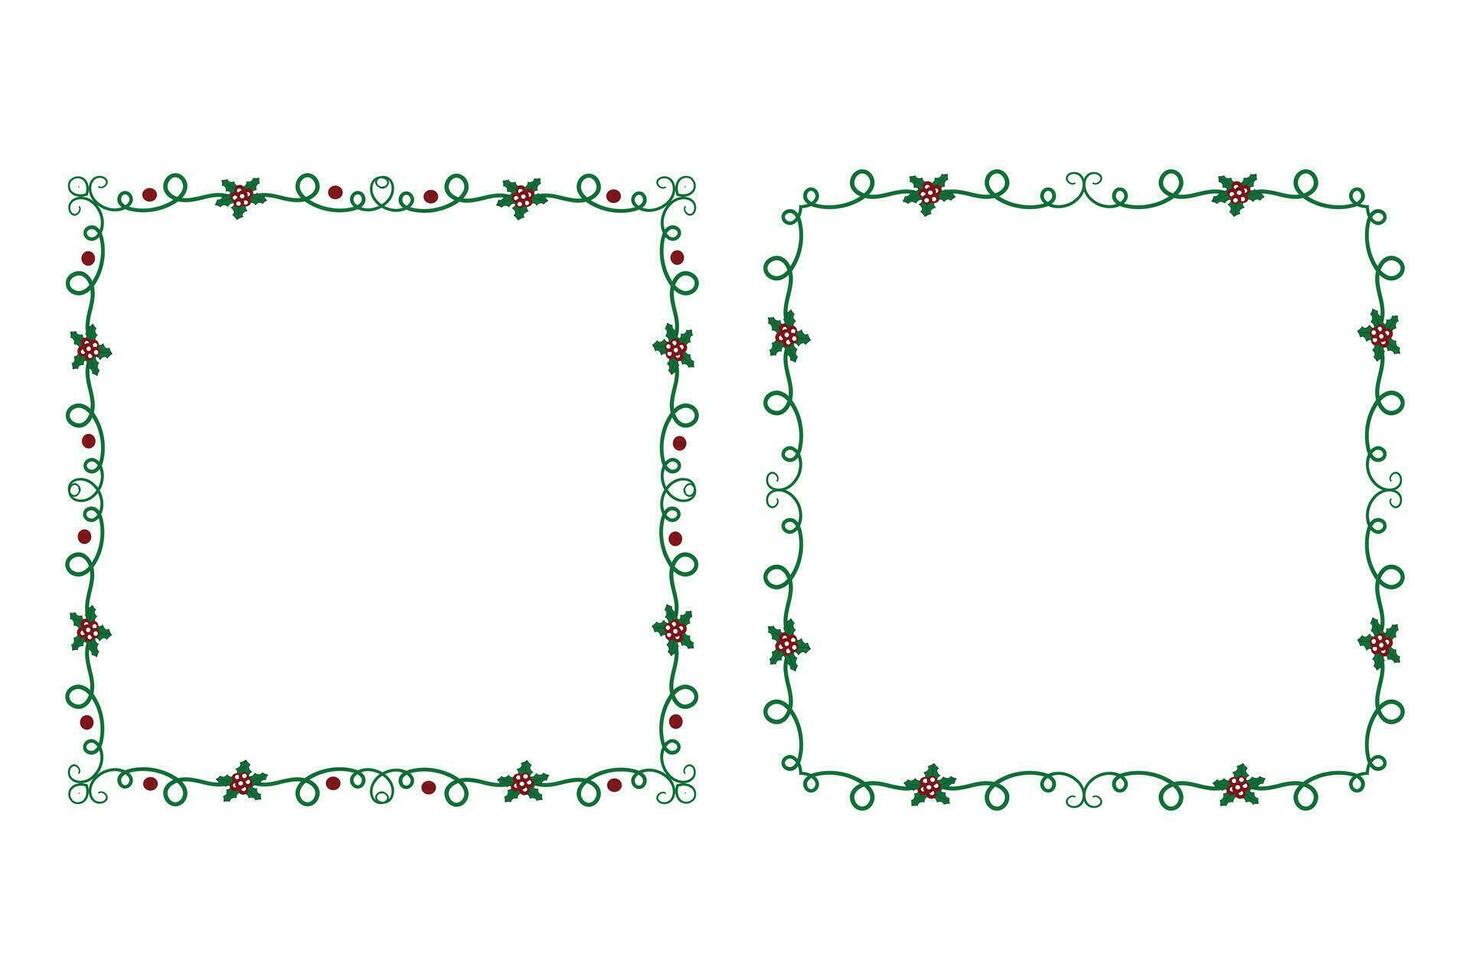 Decorative ornamental Christmas border frame, Merry Christmas holly leaves Square frames, ornament frame border corner Decoration, Wedding greeting cards invitation card holiday page borders vector